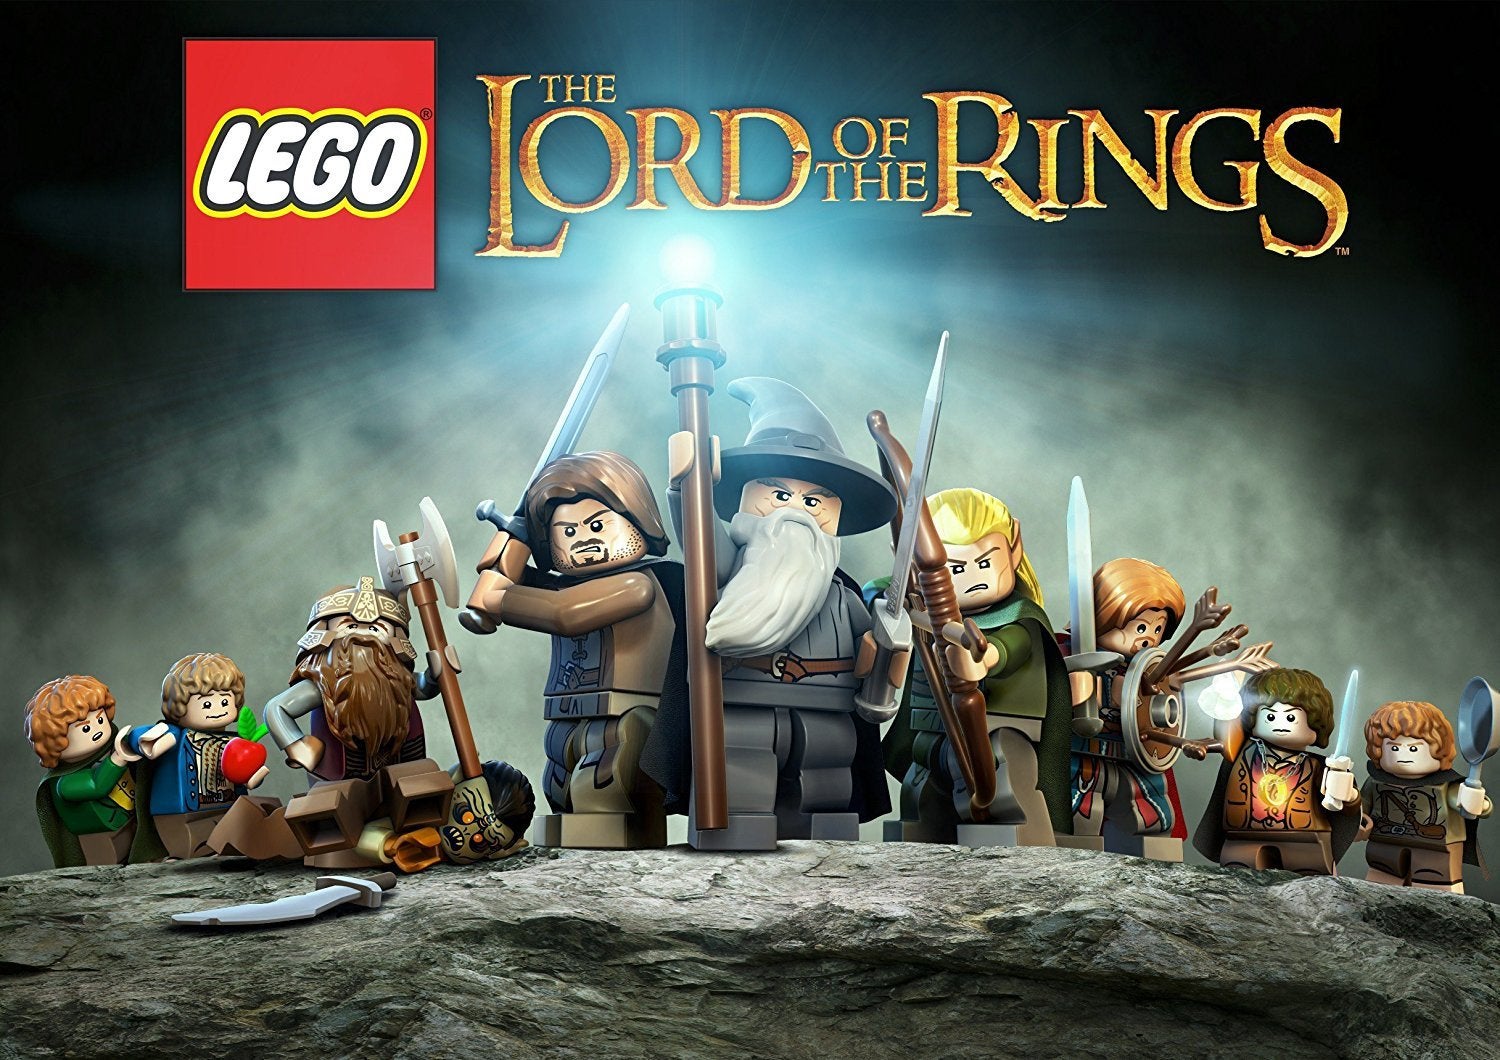 LEGO Lord of The Rings for sale in Decatur, Illinois | Facebook Marketplace  | Facebook